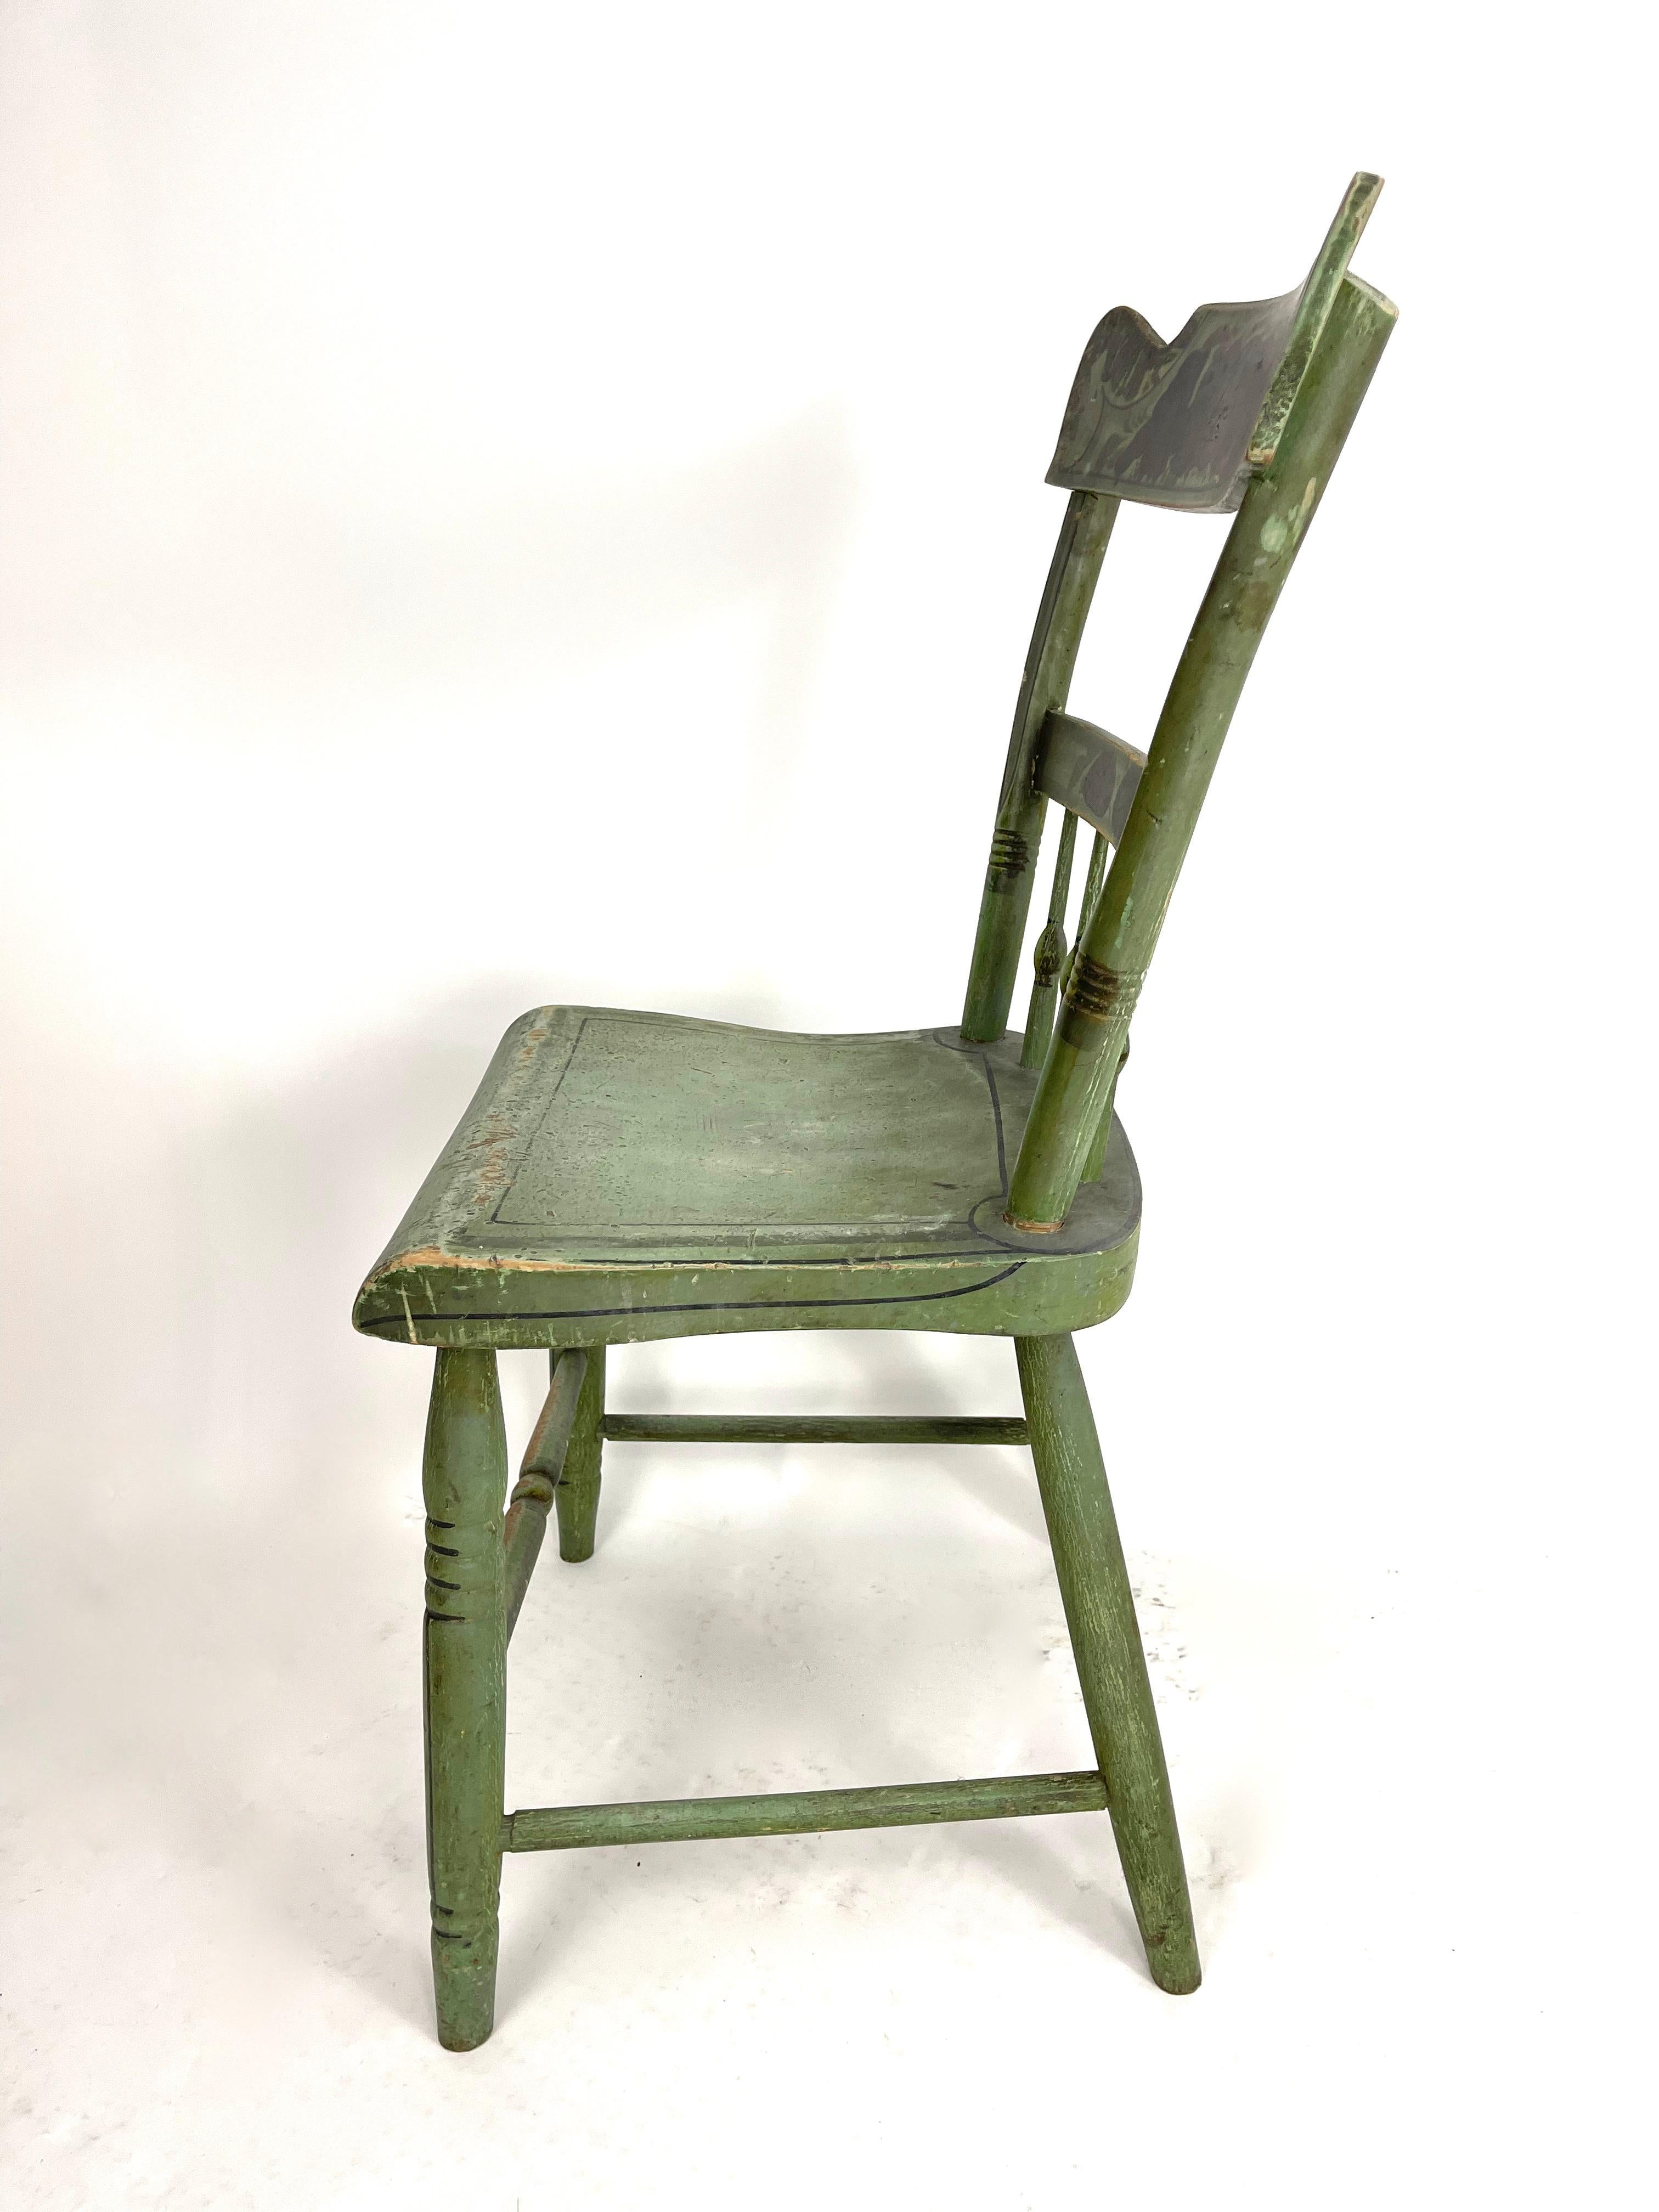 Early 19th Century Set of 6 19th Century American Country Green Painted Dining Chairs, c. 1820-30